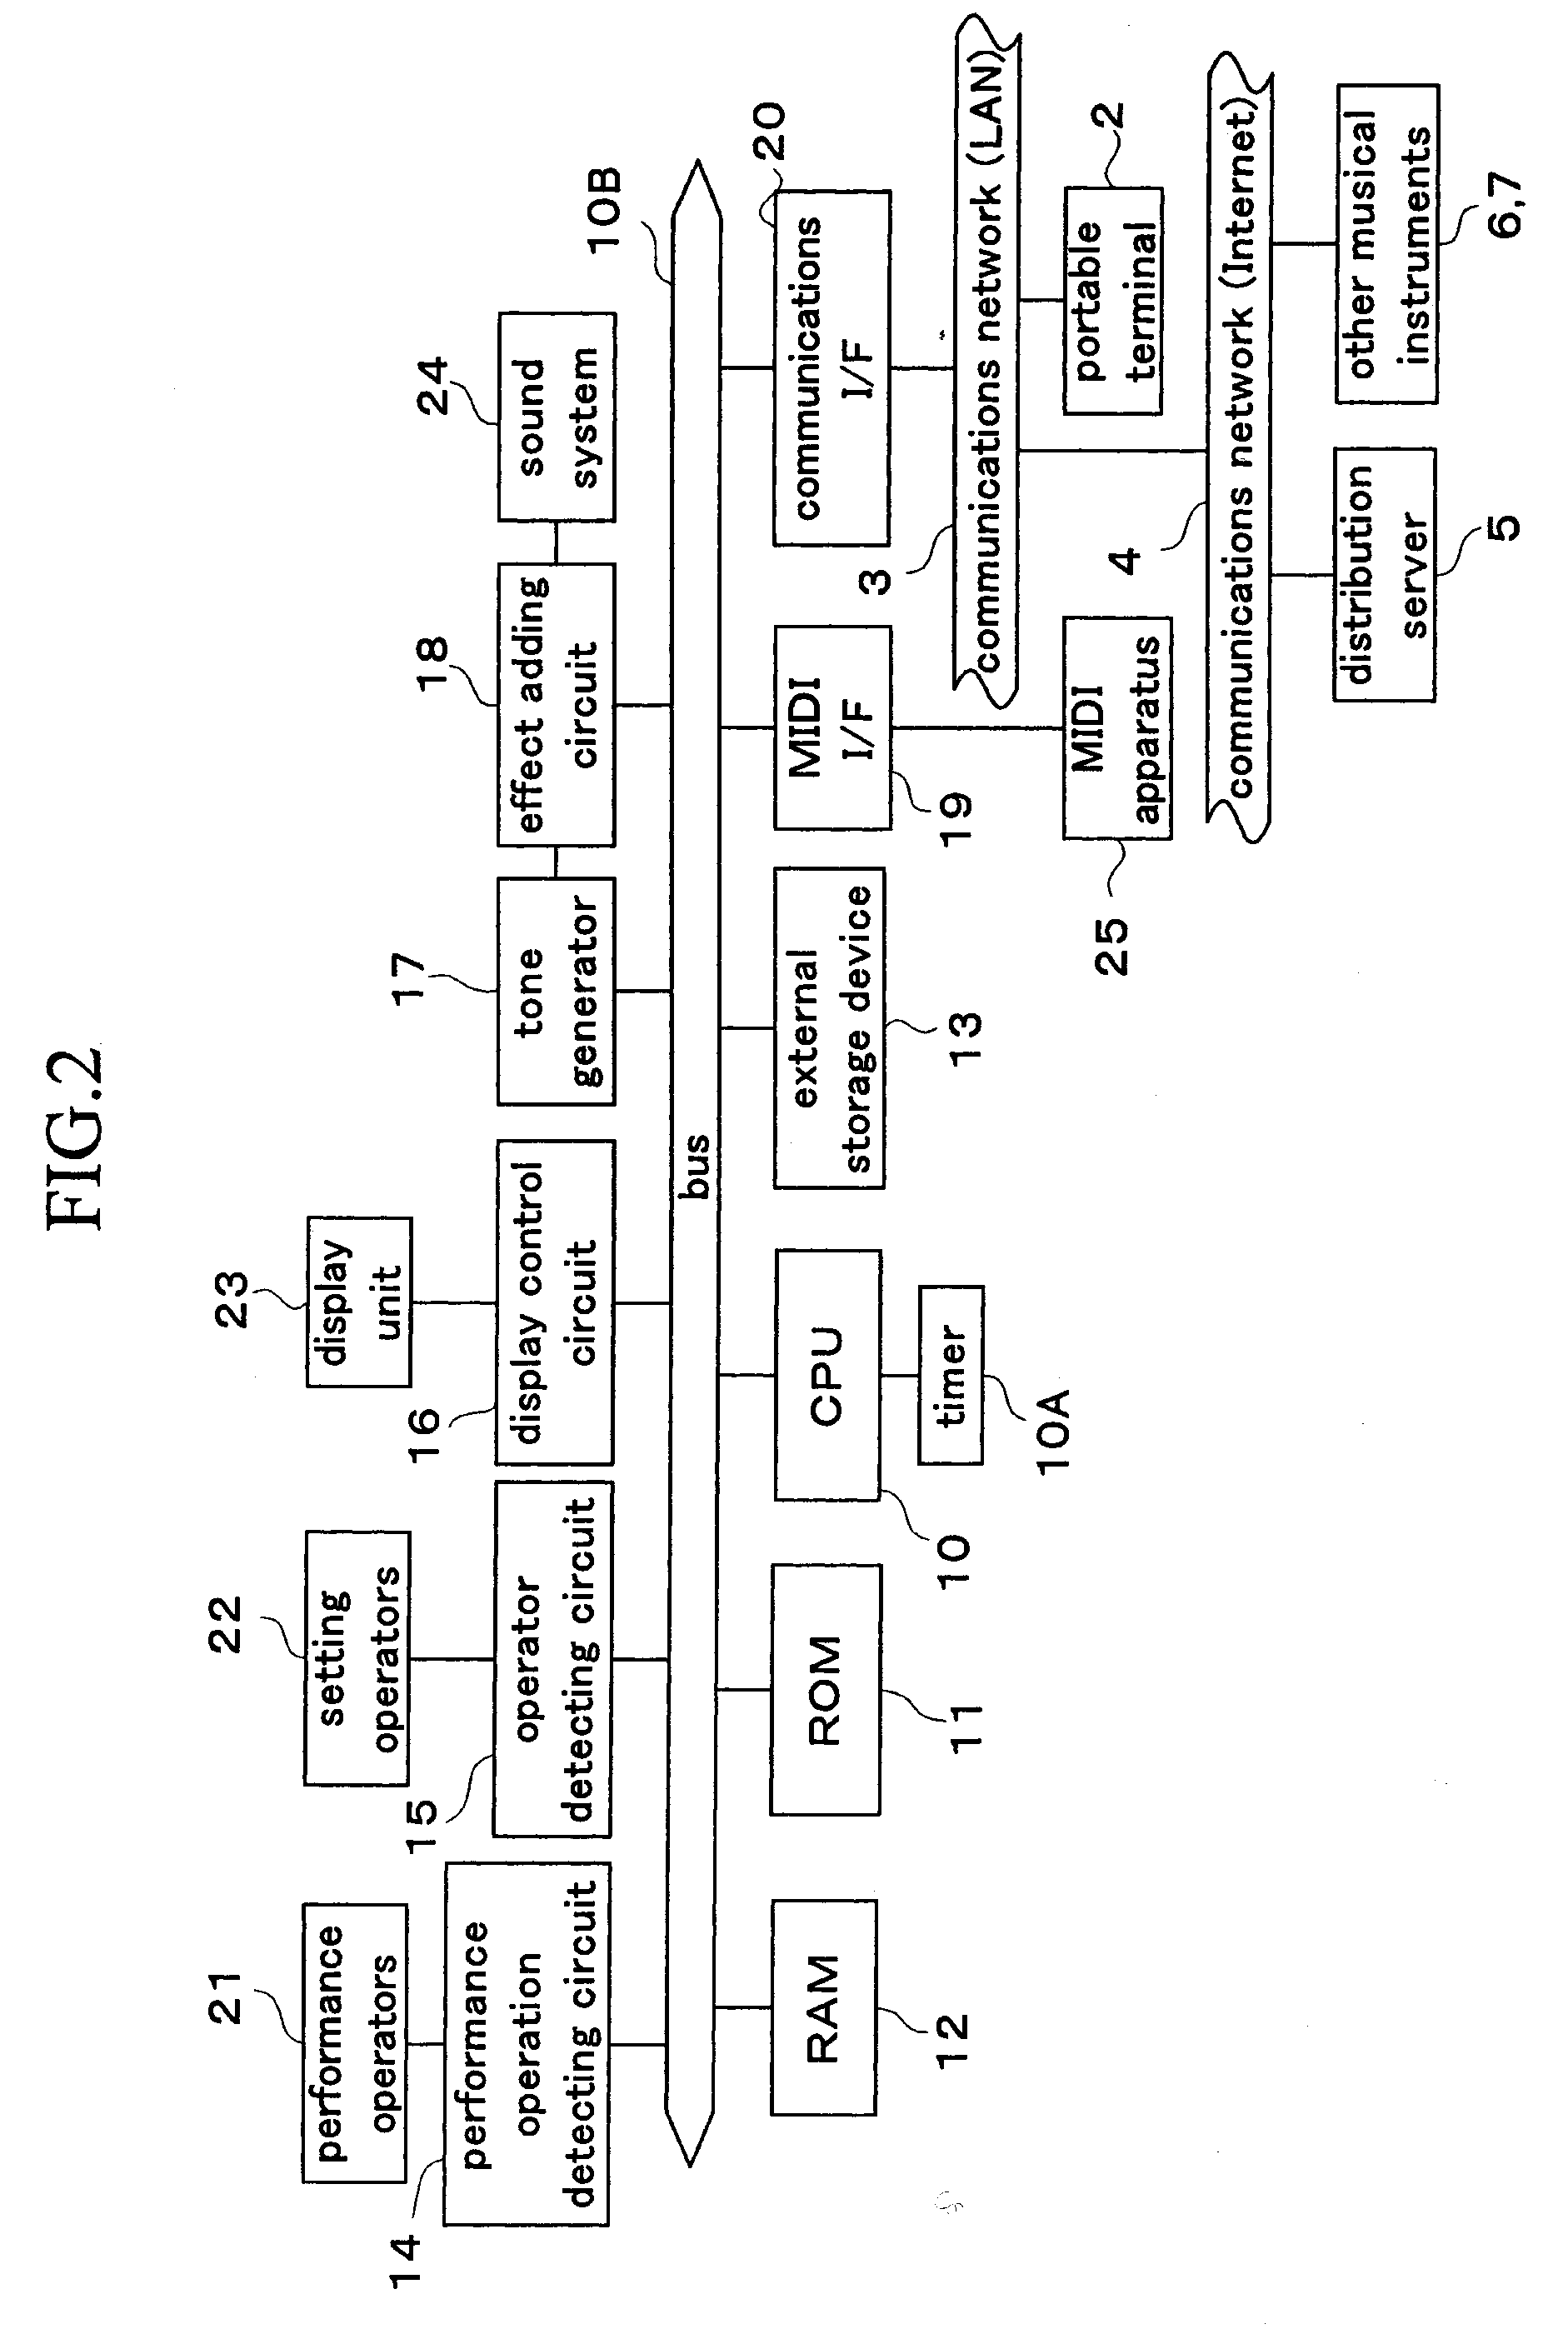 Service provision system for electronic musical apparatus